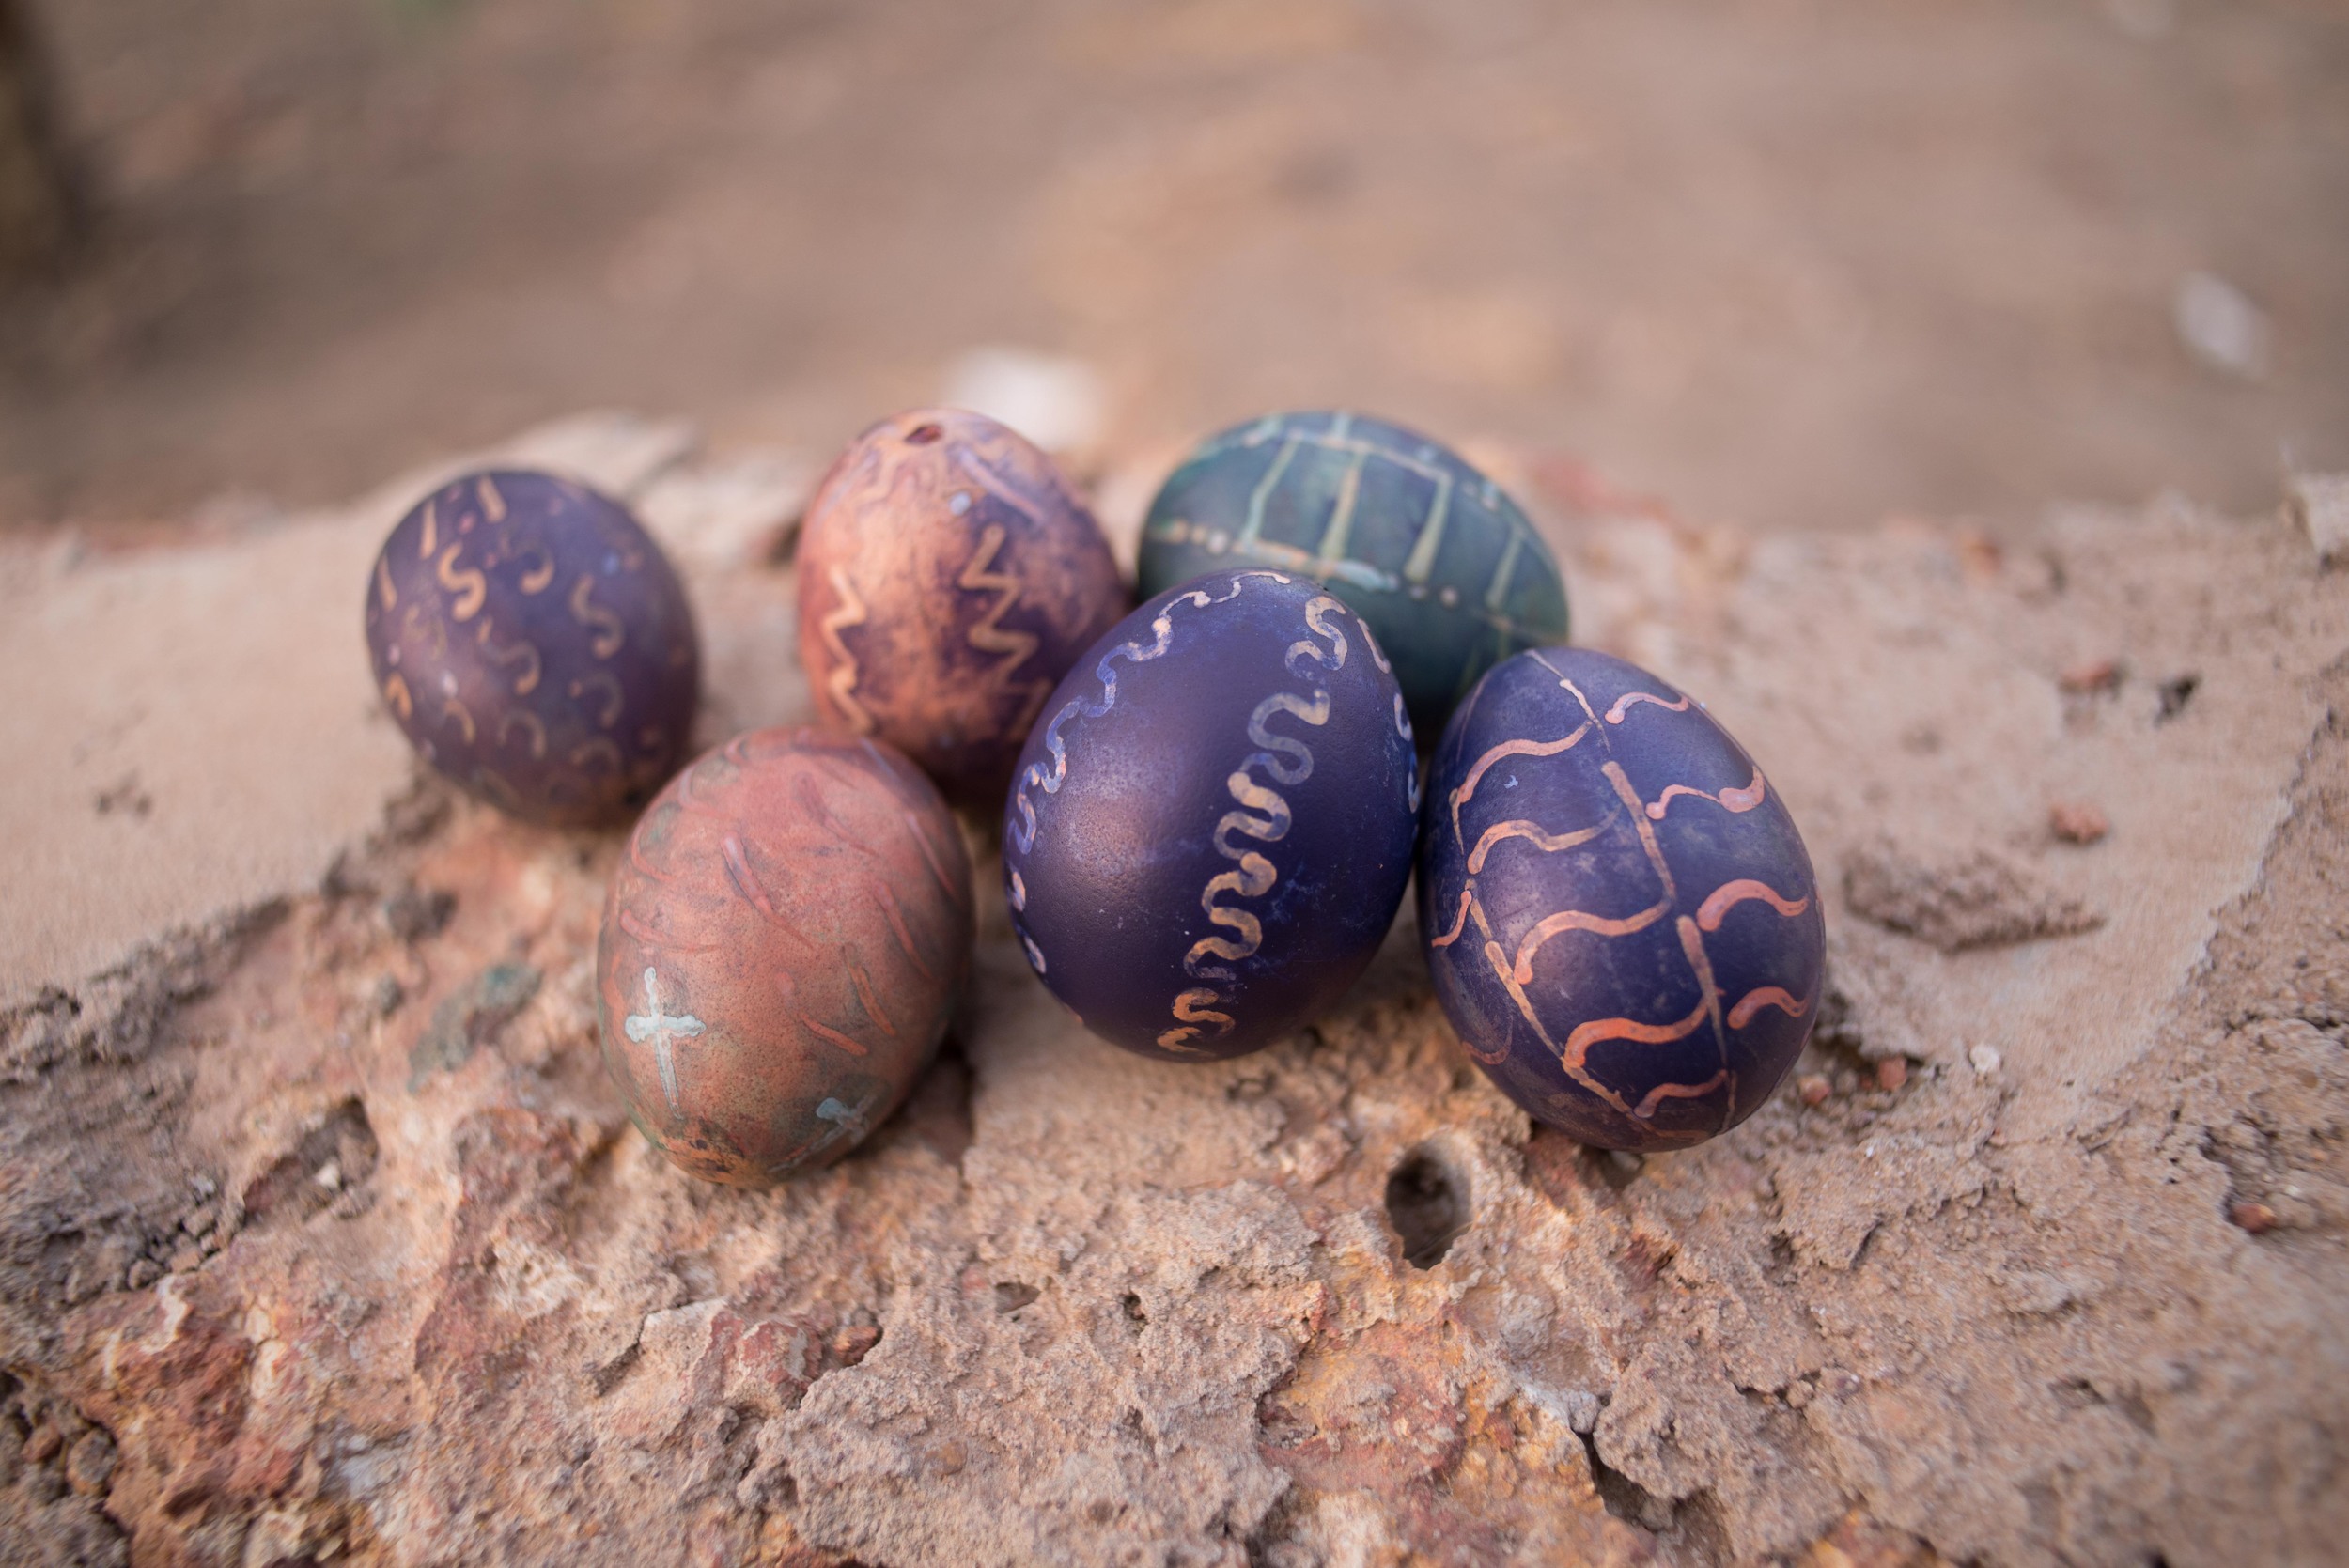  The ugliest Easter Eggs in the world, colored with powdered clothing dye and vinegar with wax resist motifs courtesy of a box of candles and the head of a pin. 